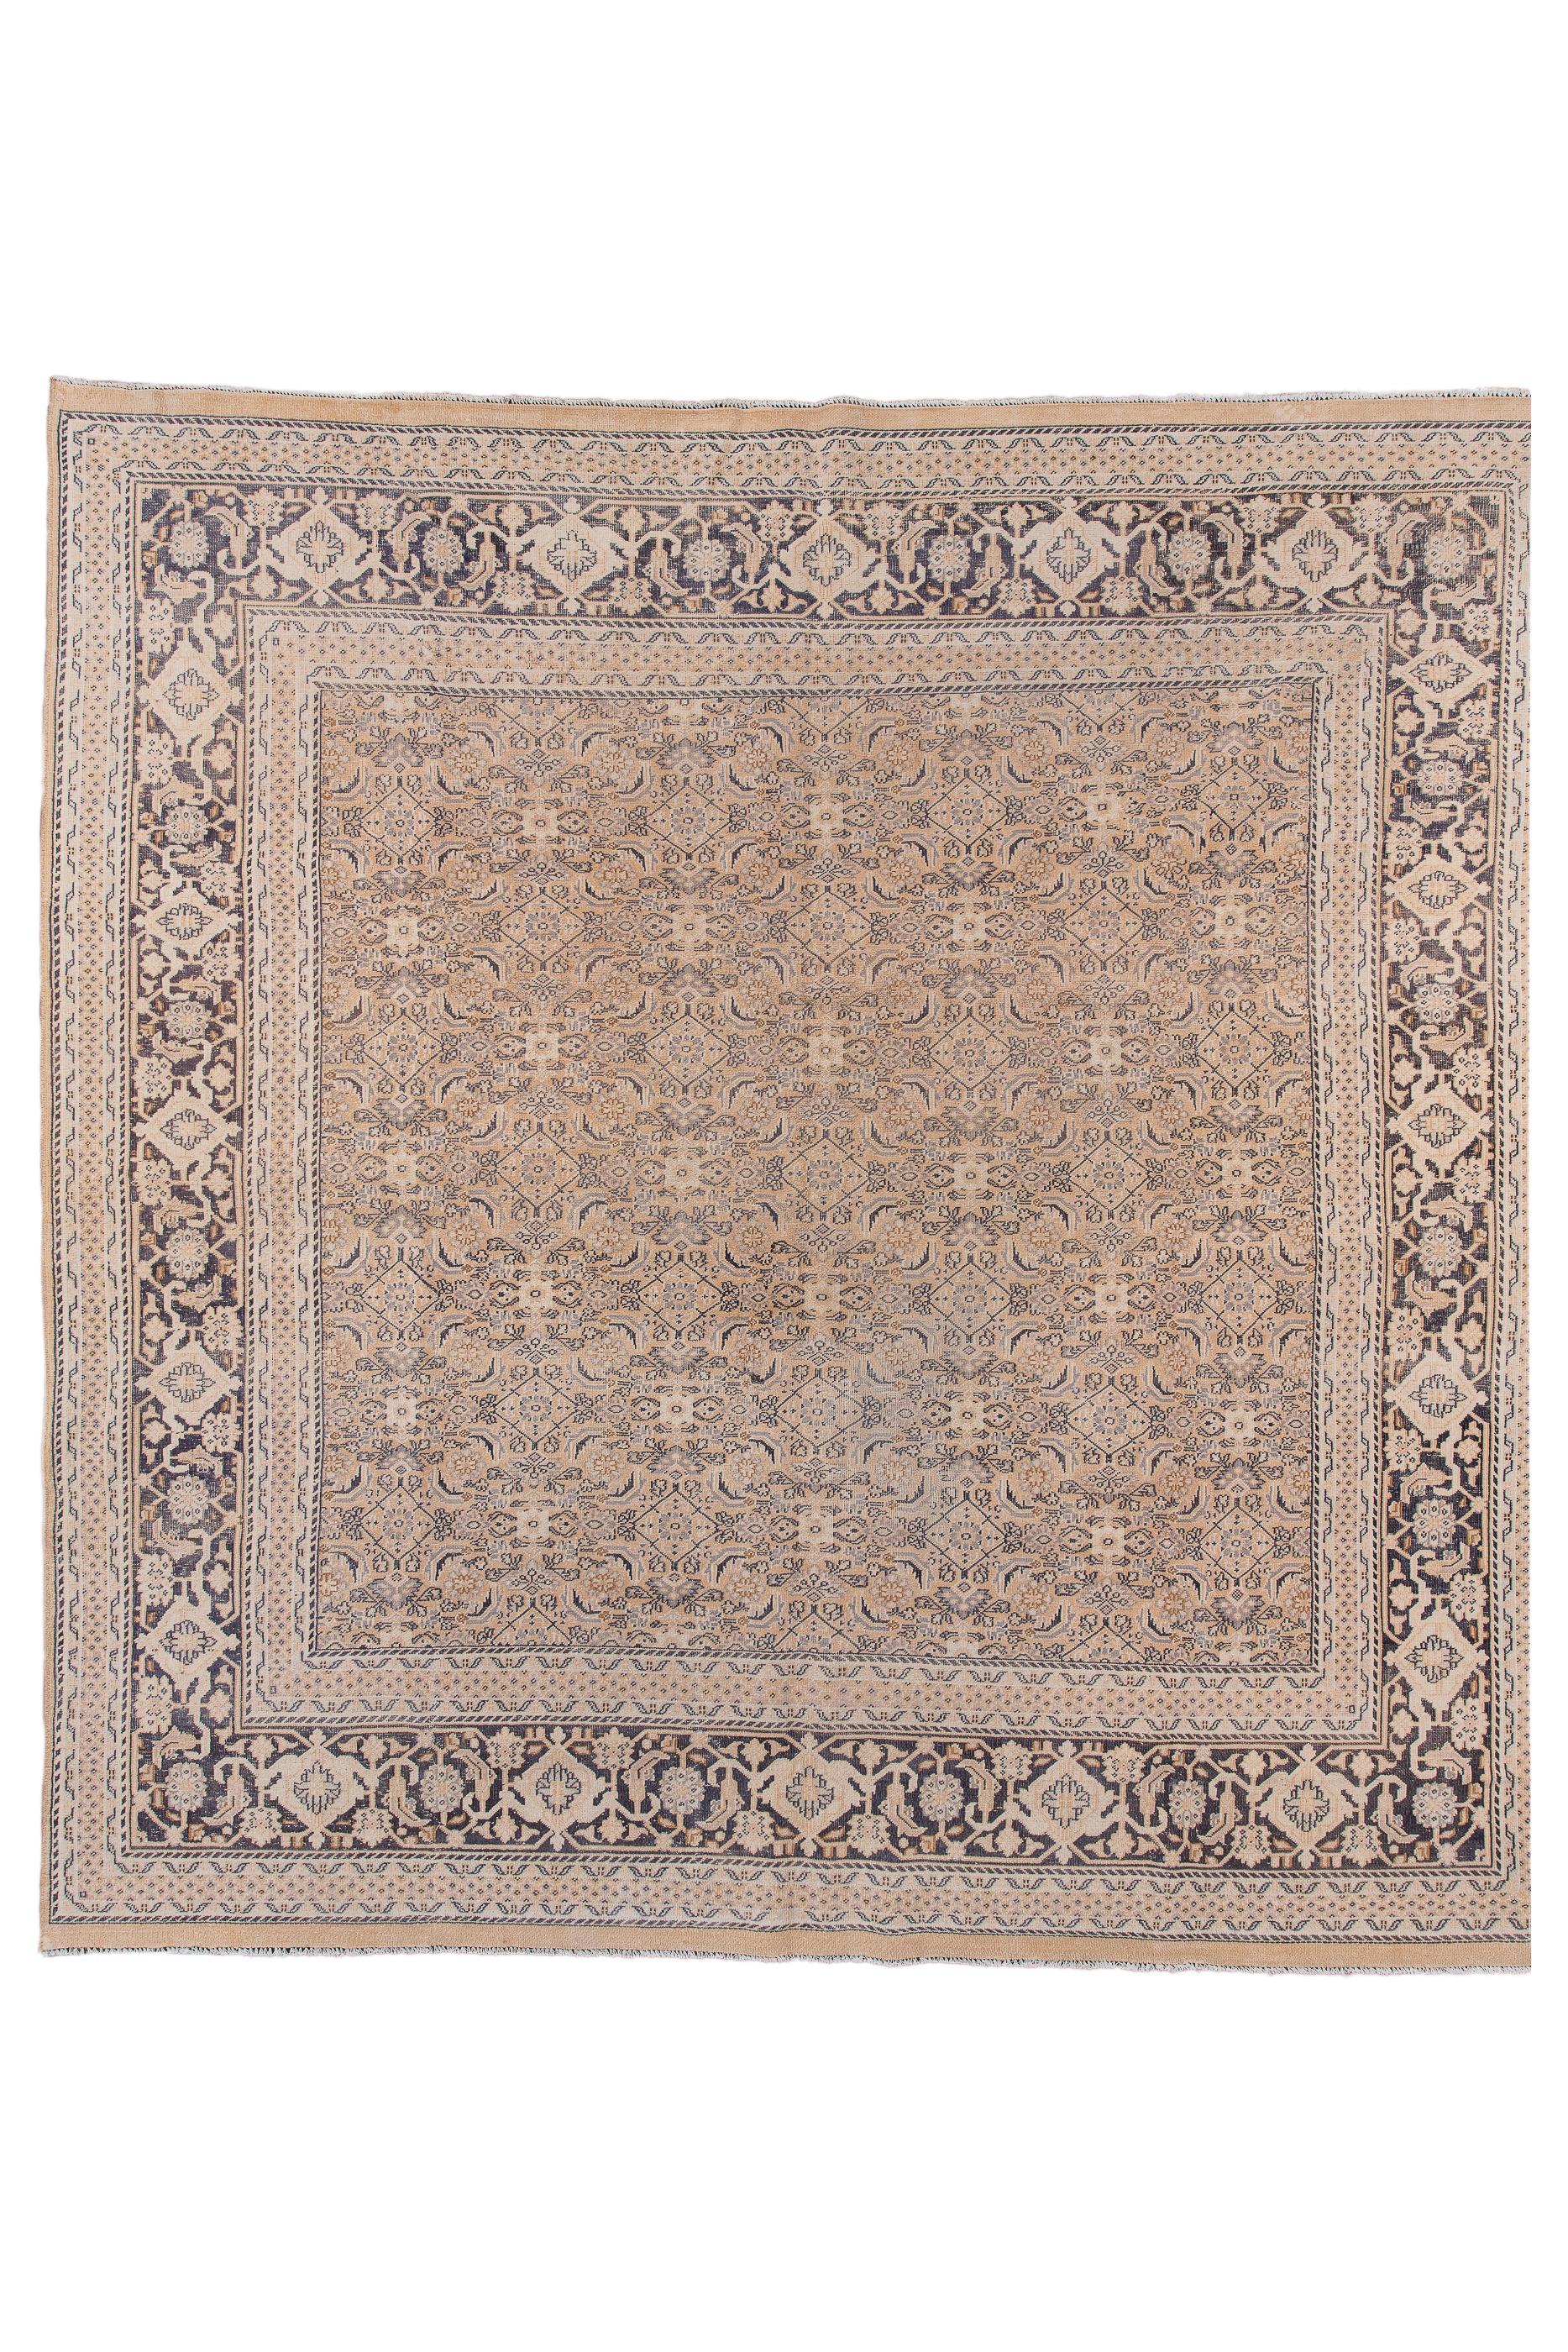 This “Turkish Tabriz” shows a perfectly balanced small, allover Herati design on a buff field, set off by a symmetric reversing turtle main border on a dark ground. Outer minor trimmed at the sides and is intact at the ends. Cotton foundation.